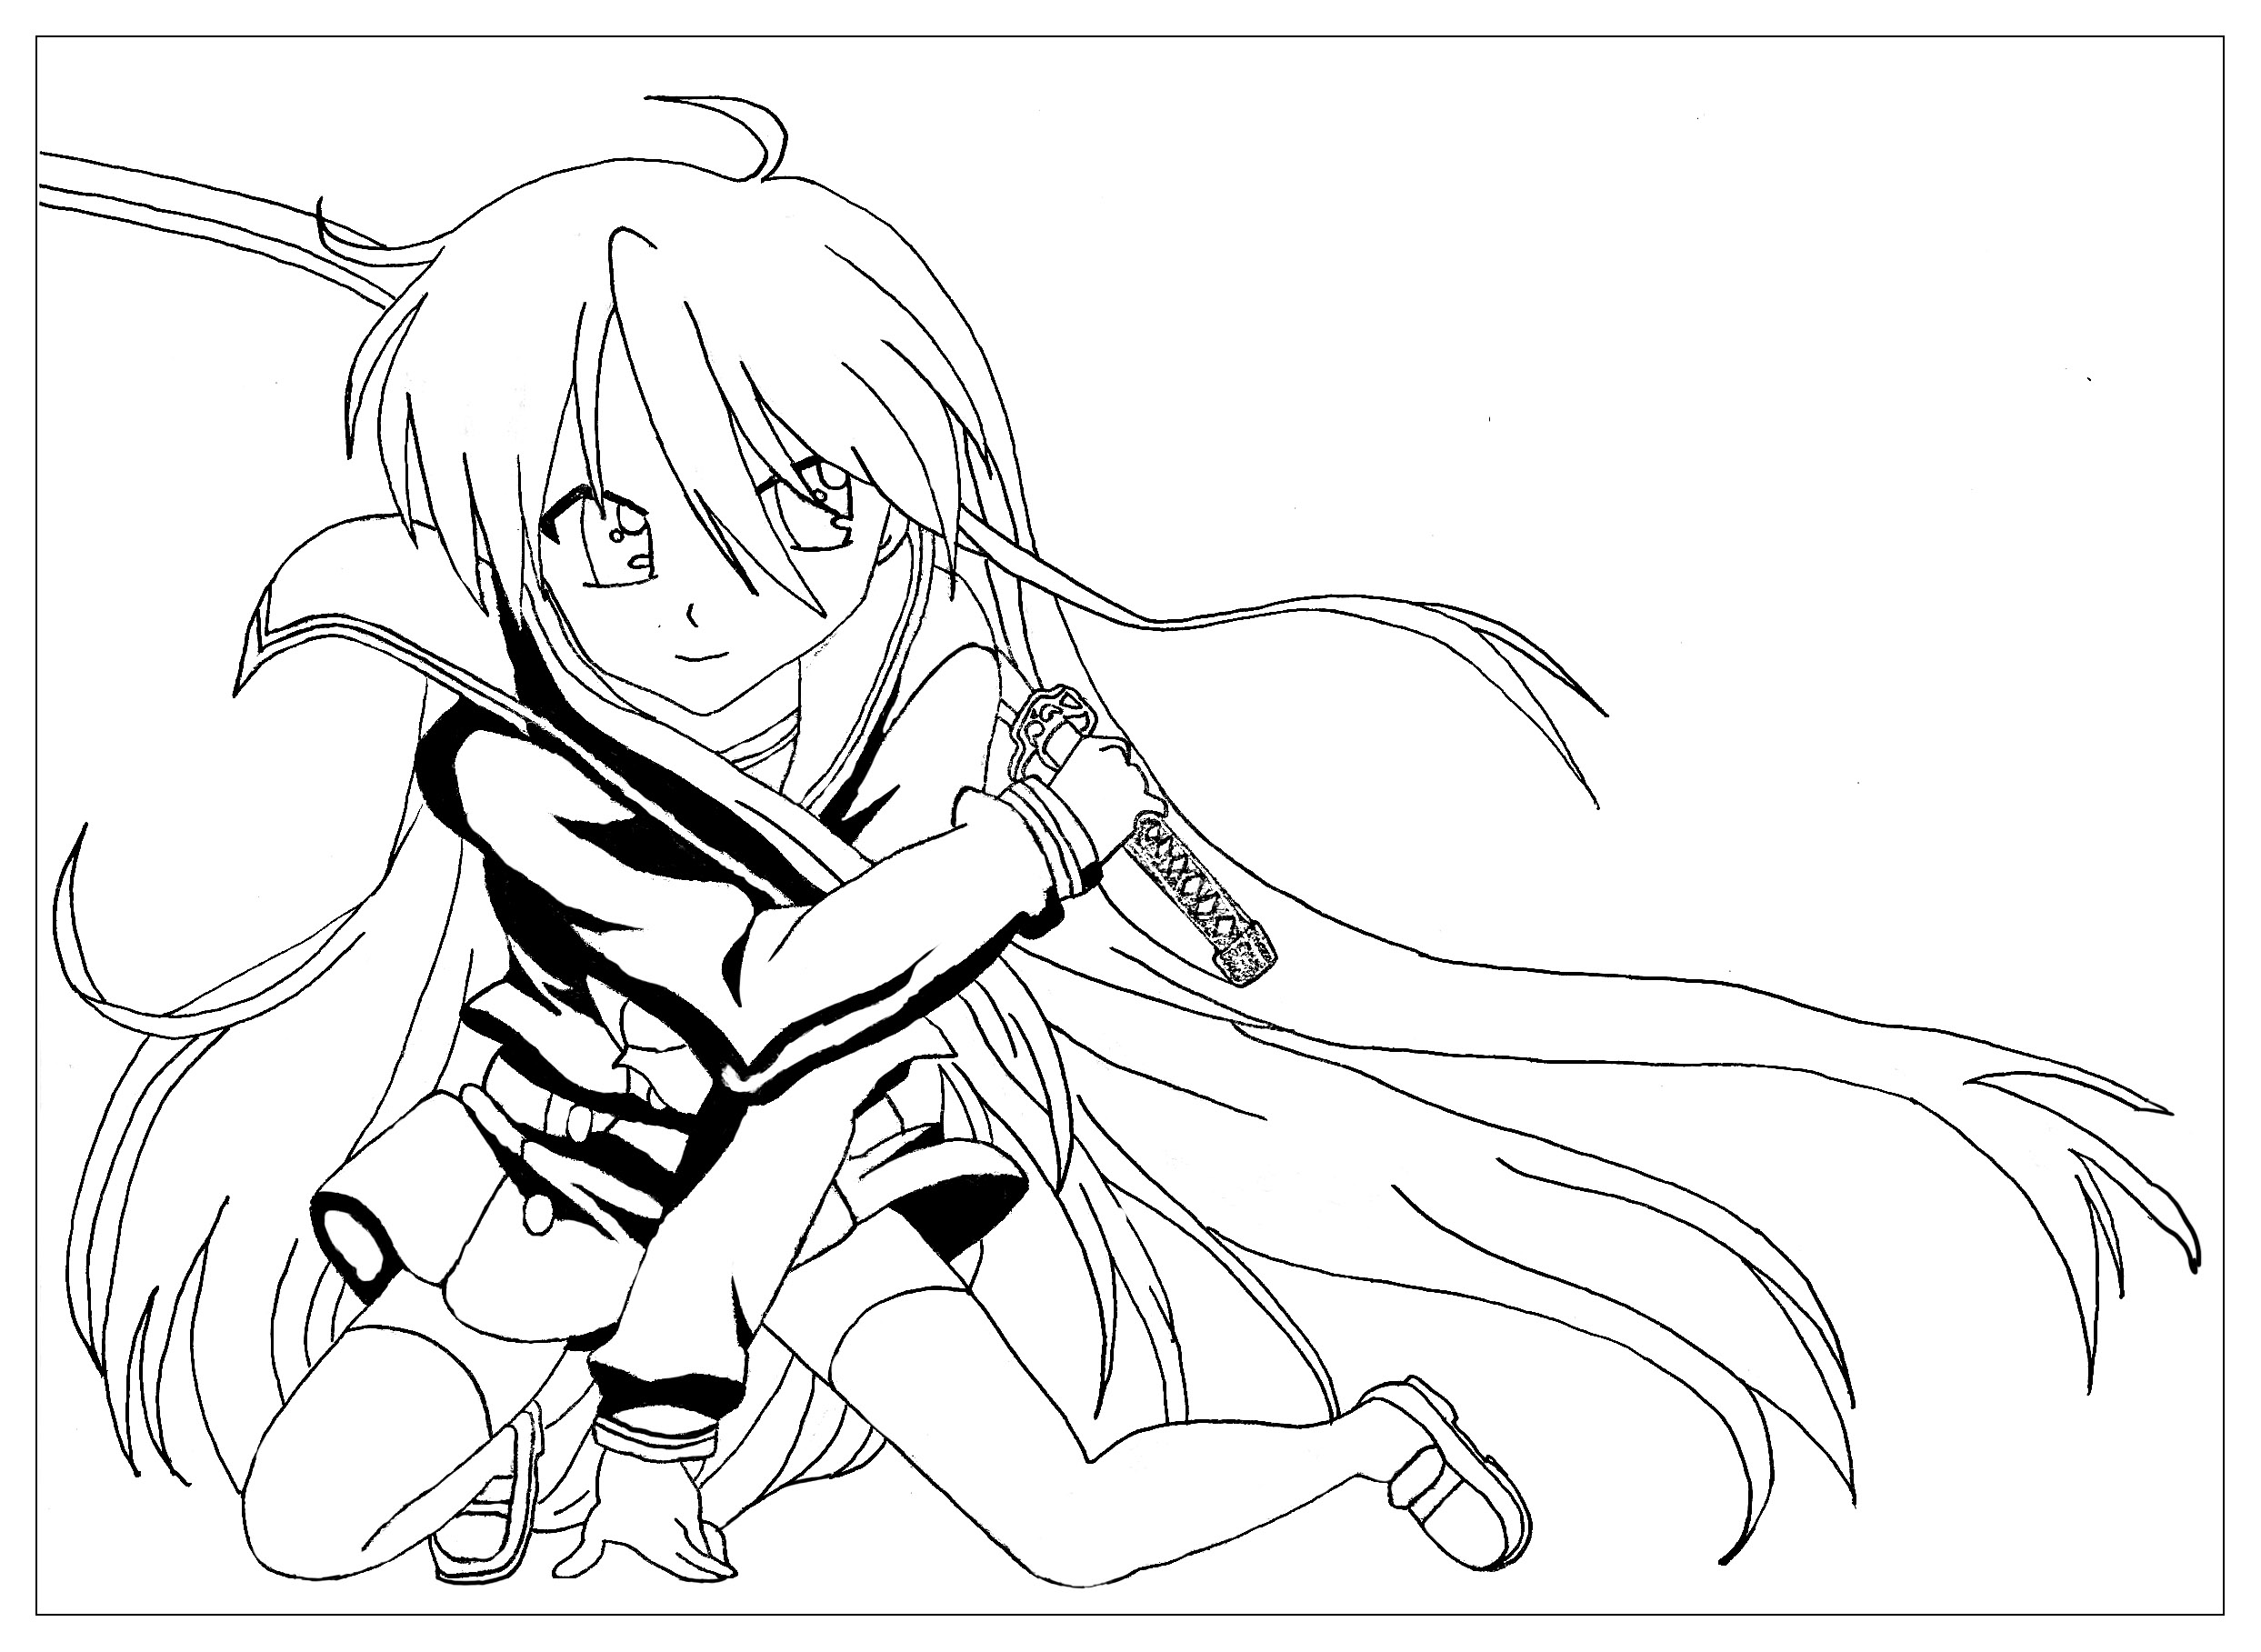 A ORIGEM Z  Anime girl drawings, Cute coloring pages, Coloring pages